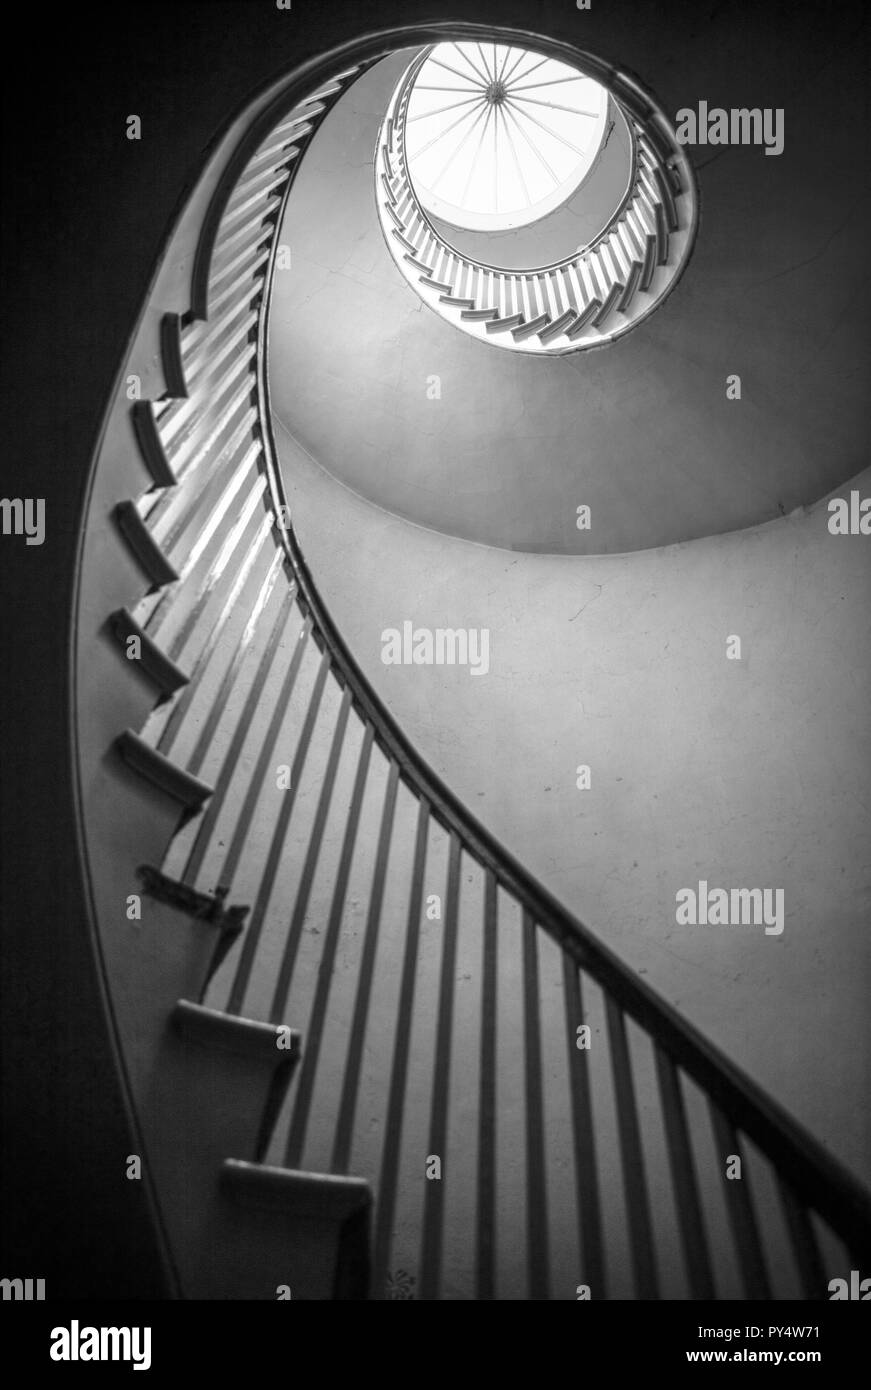 Spiral staircase, Spiral stairs, wooden spiral staircase, spiral stair case, Spiral stairs staircase, abstract, black and white, winding staircase, Stock Photo